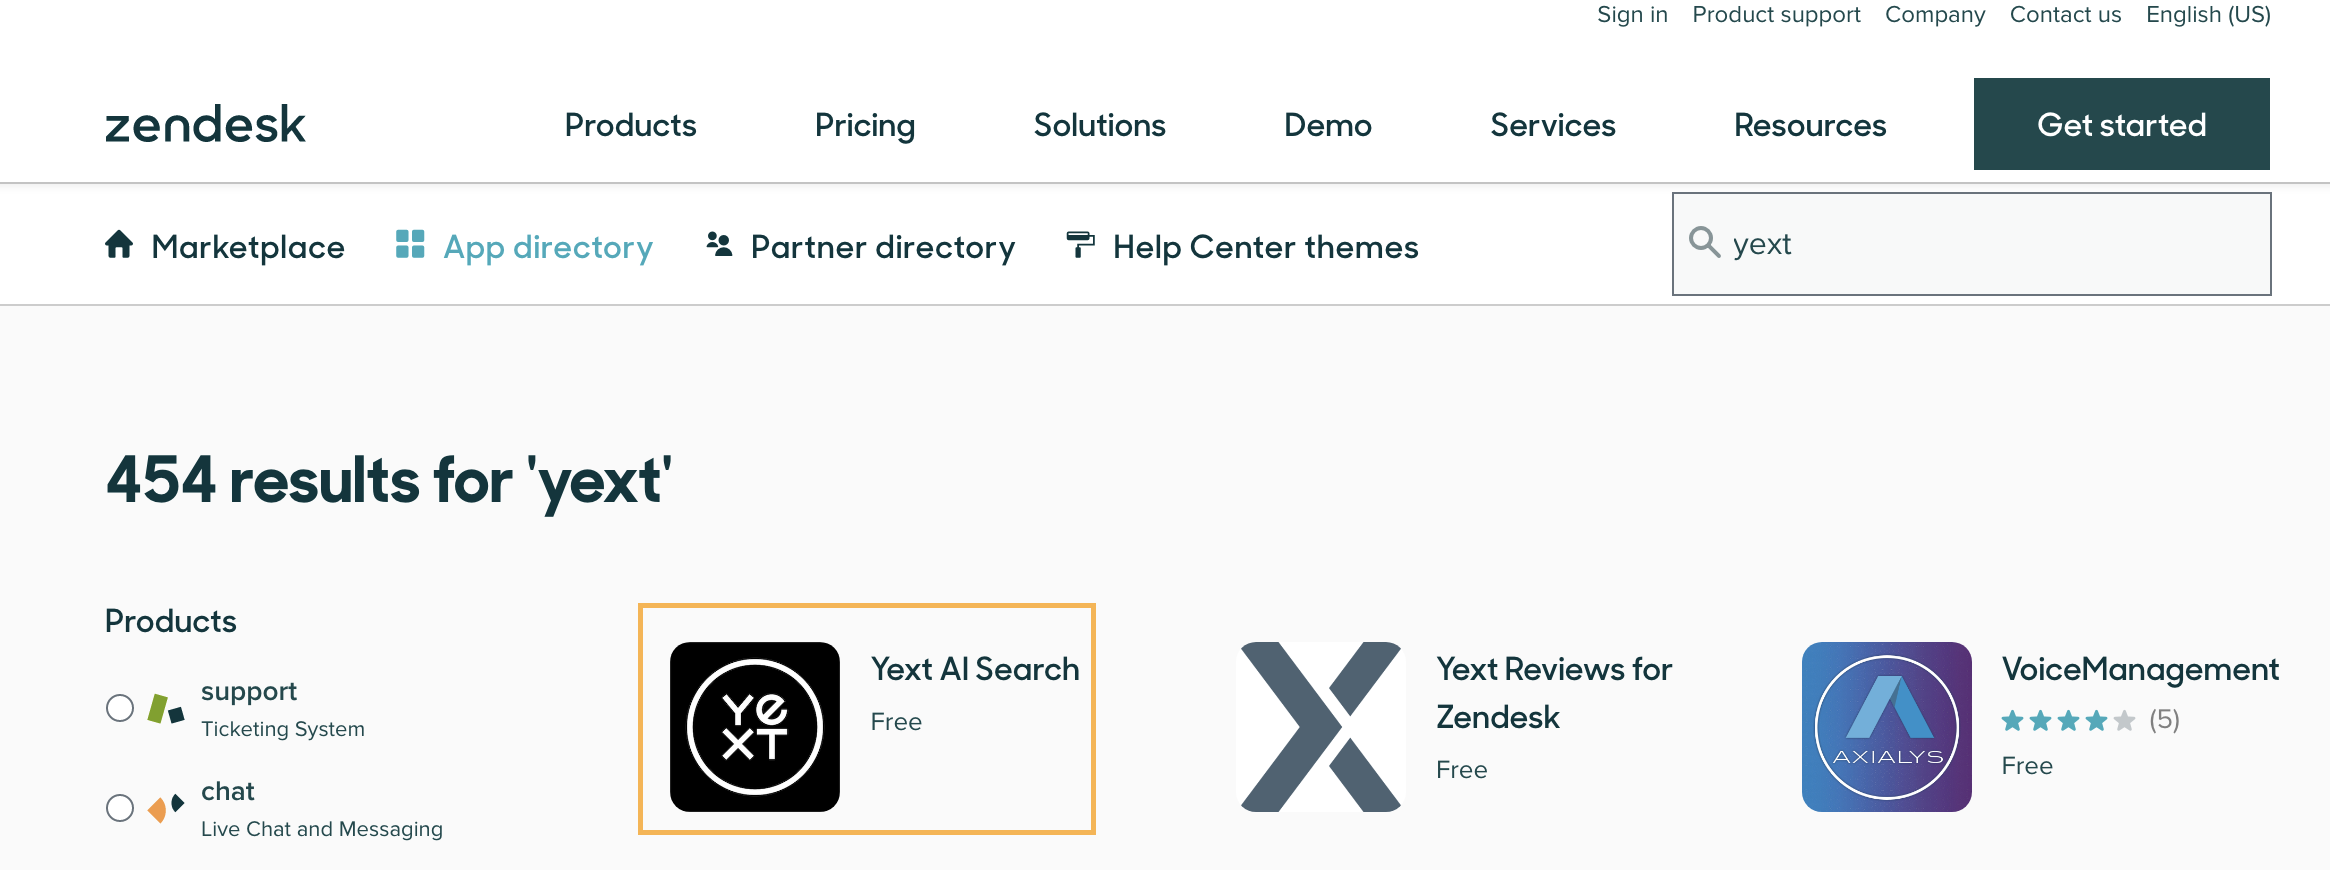 Search for Yext